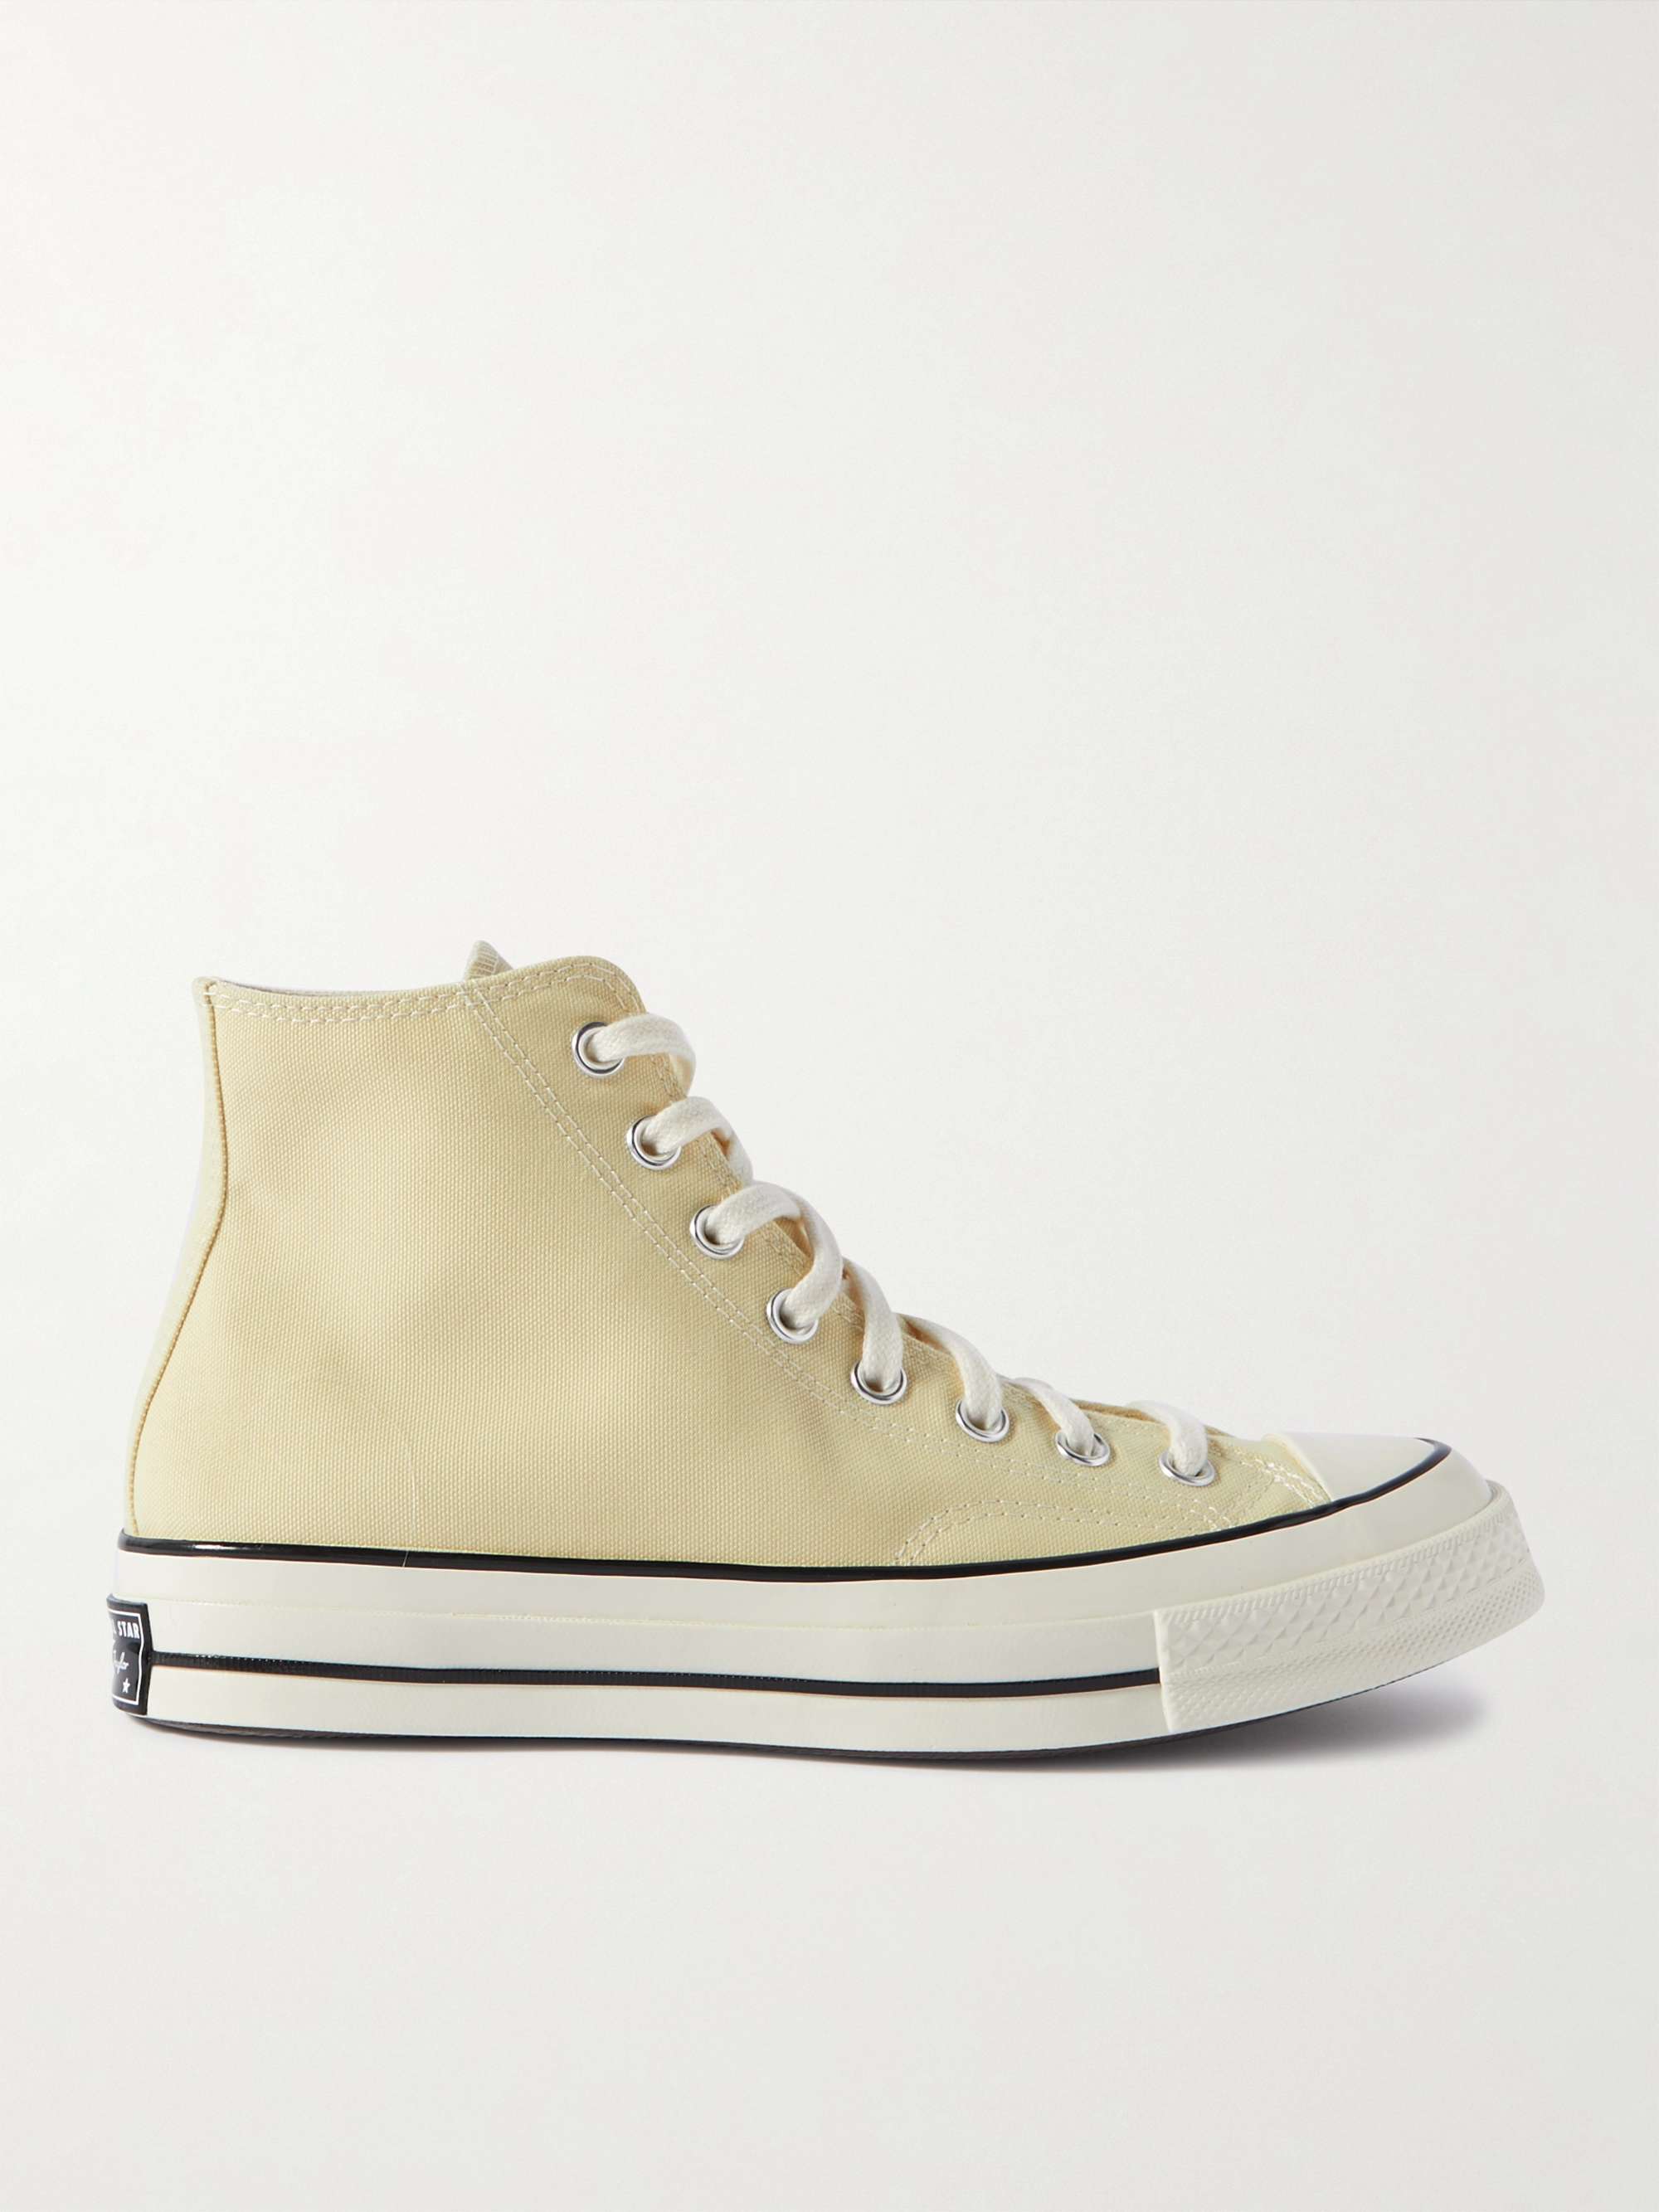 CONVERSE Chuck 70 Recycled Canvas High-Top Sneakers | MR PORTER